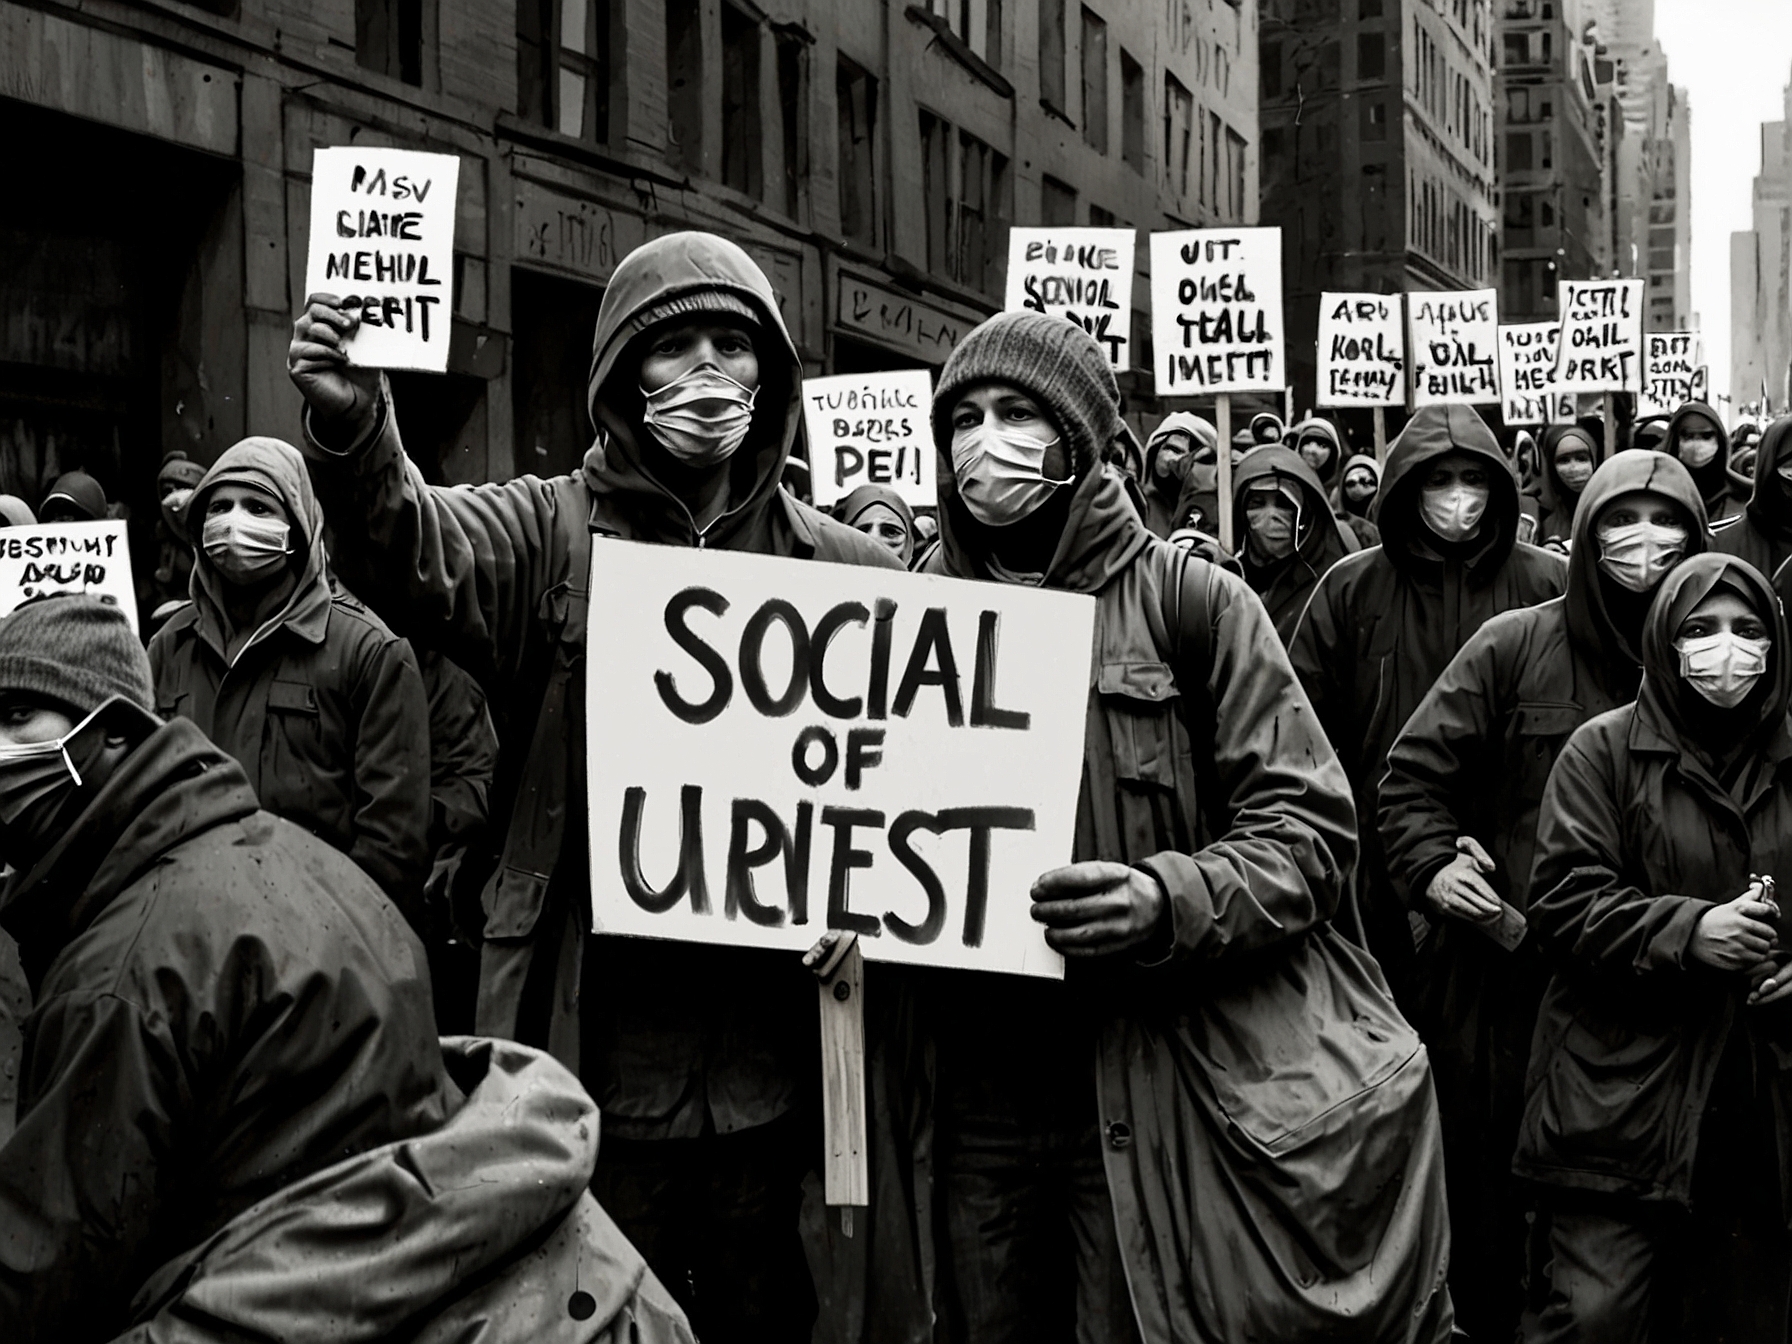 An image depicting social unrest, with protesters holding signs against austerity measures, symbolizing the social impact of high debt levels on vulnerable populations.